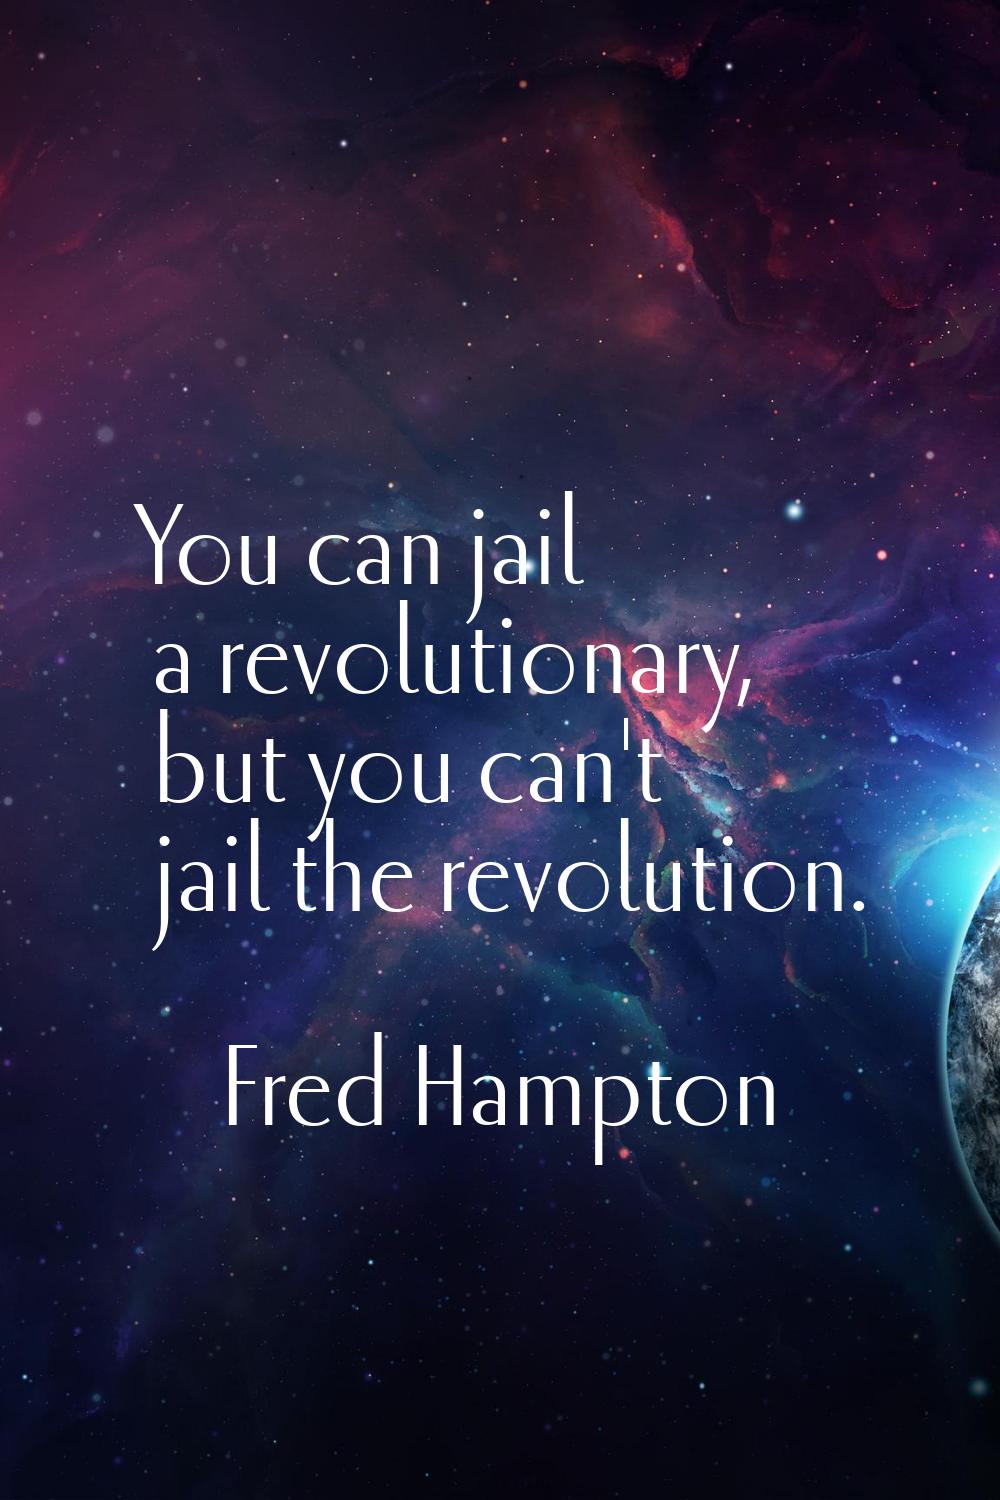 You can jail a revolutionary, but you can't jail the revolution.